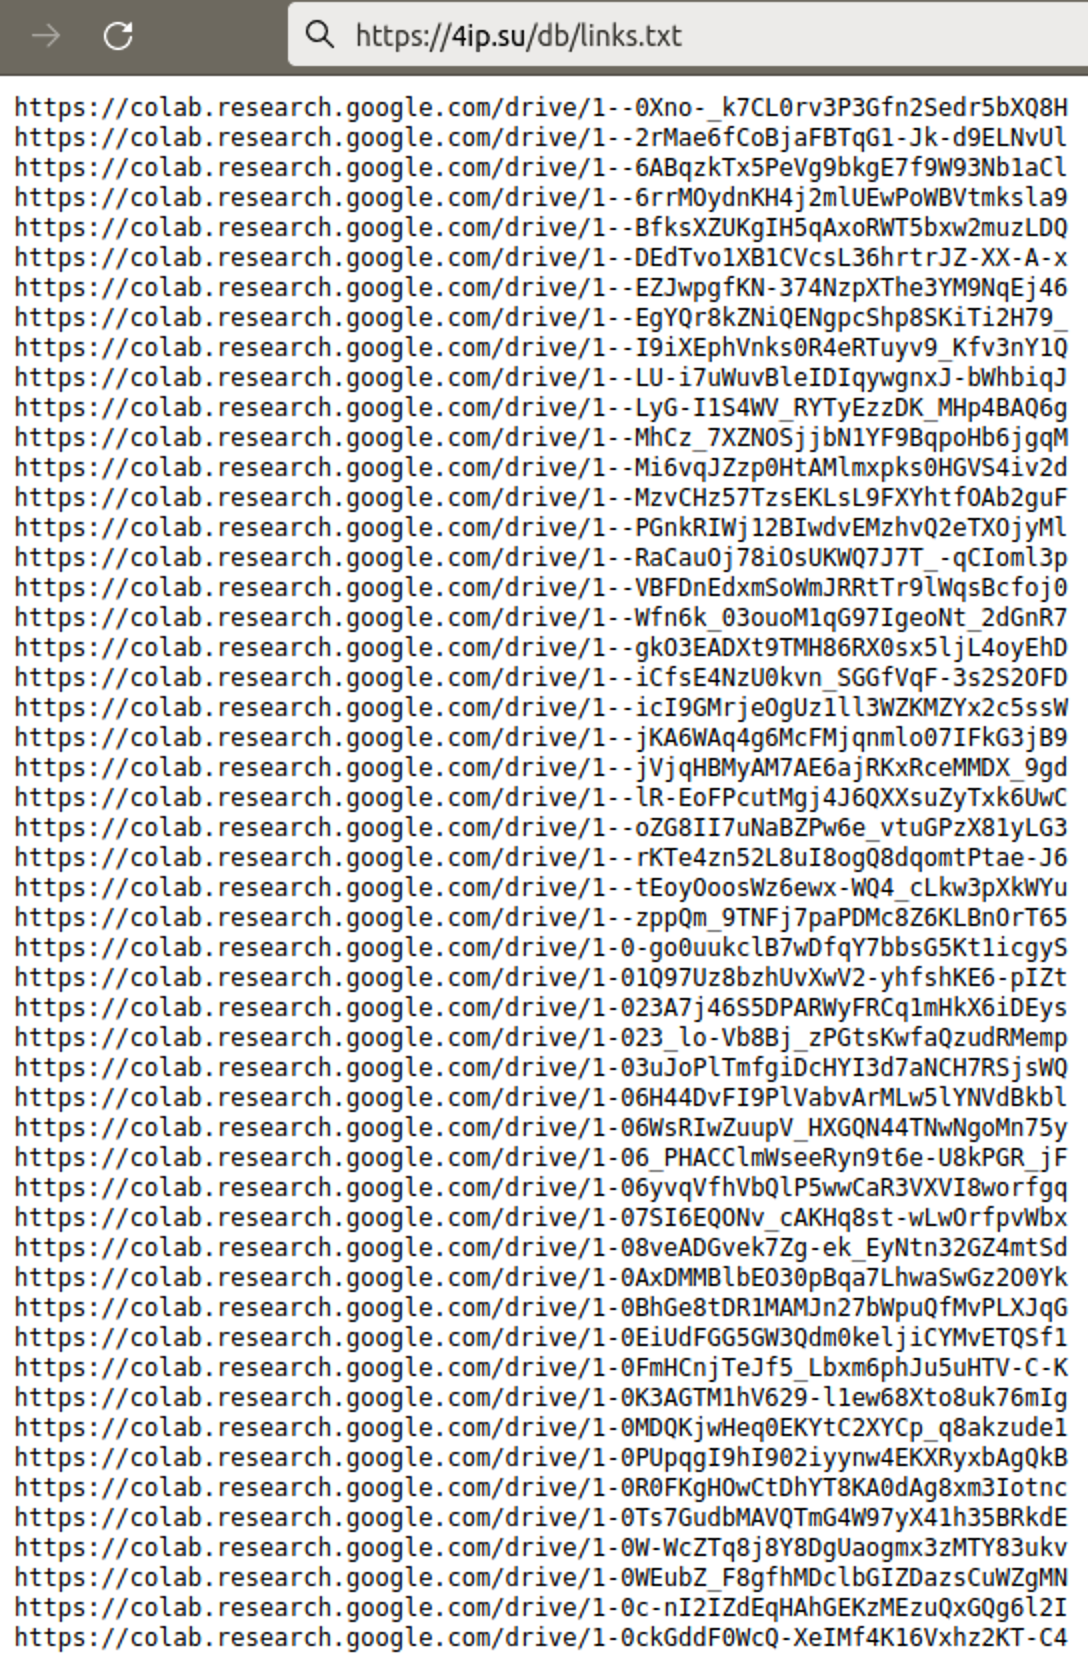 Contents of links.txt file reveal 141,341 spam links